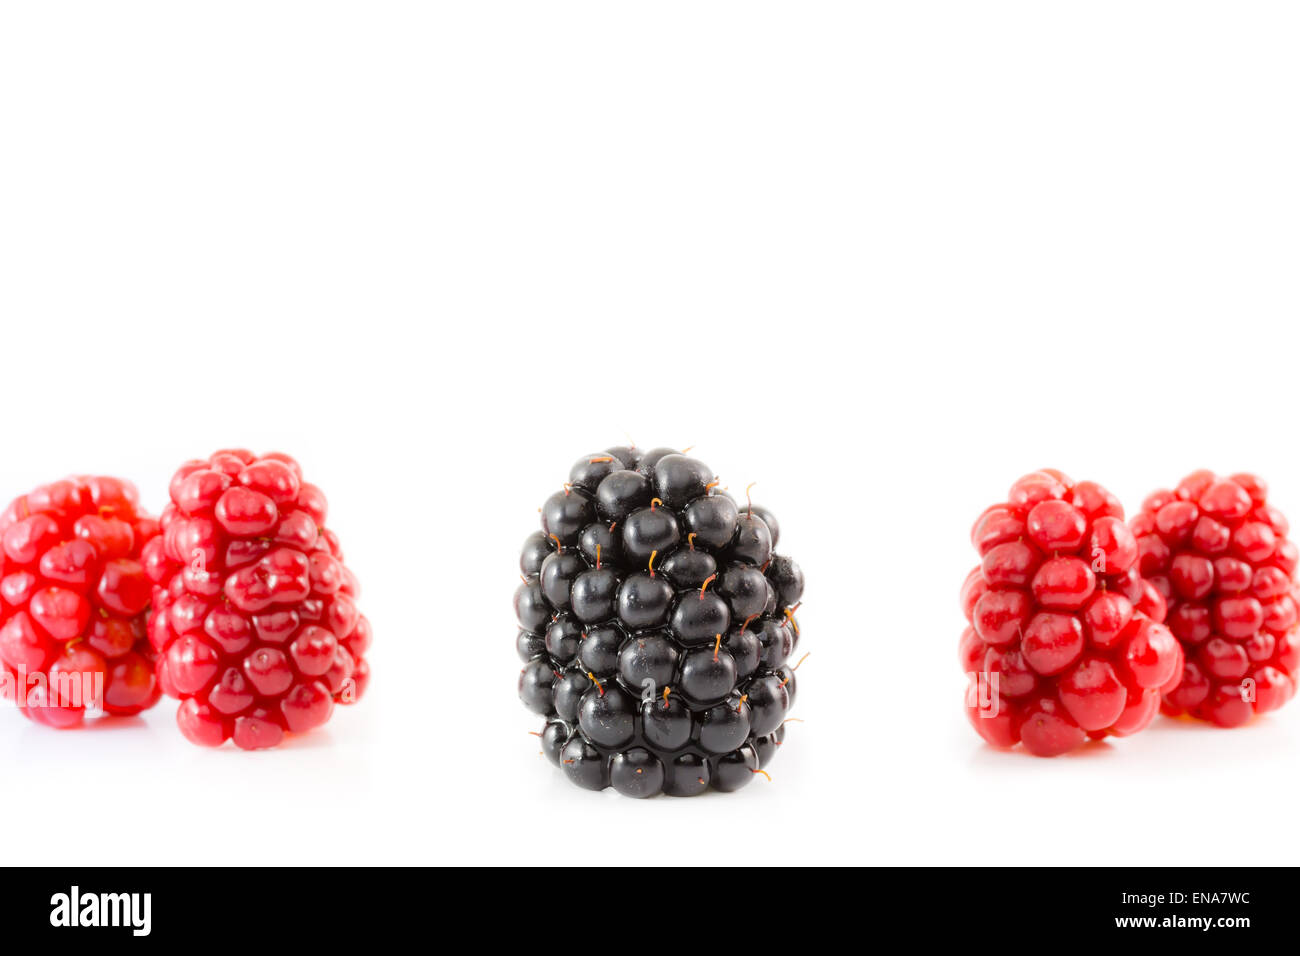 Ripe and unripe blackberry. Fruit in a row. Concept of being different. Stock Photo